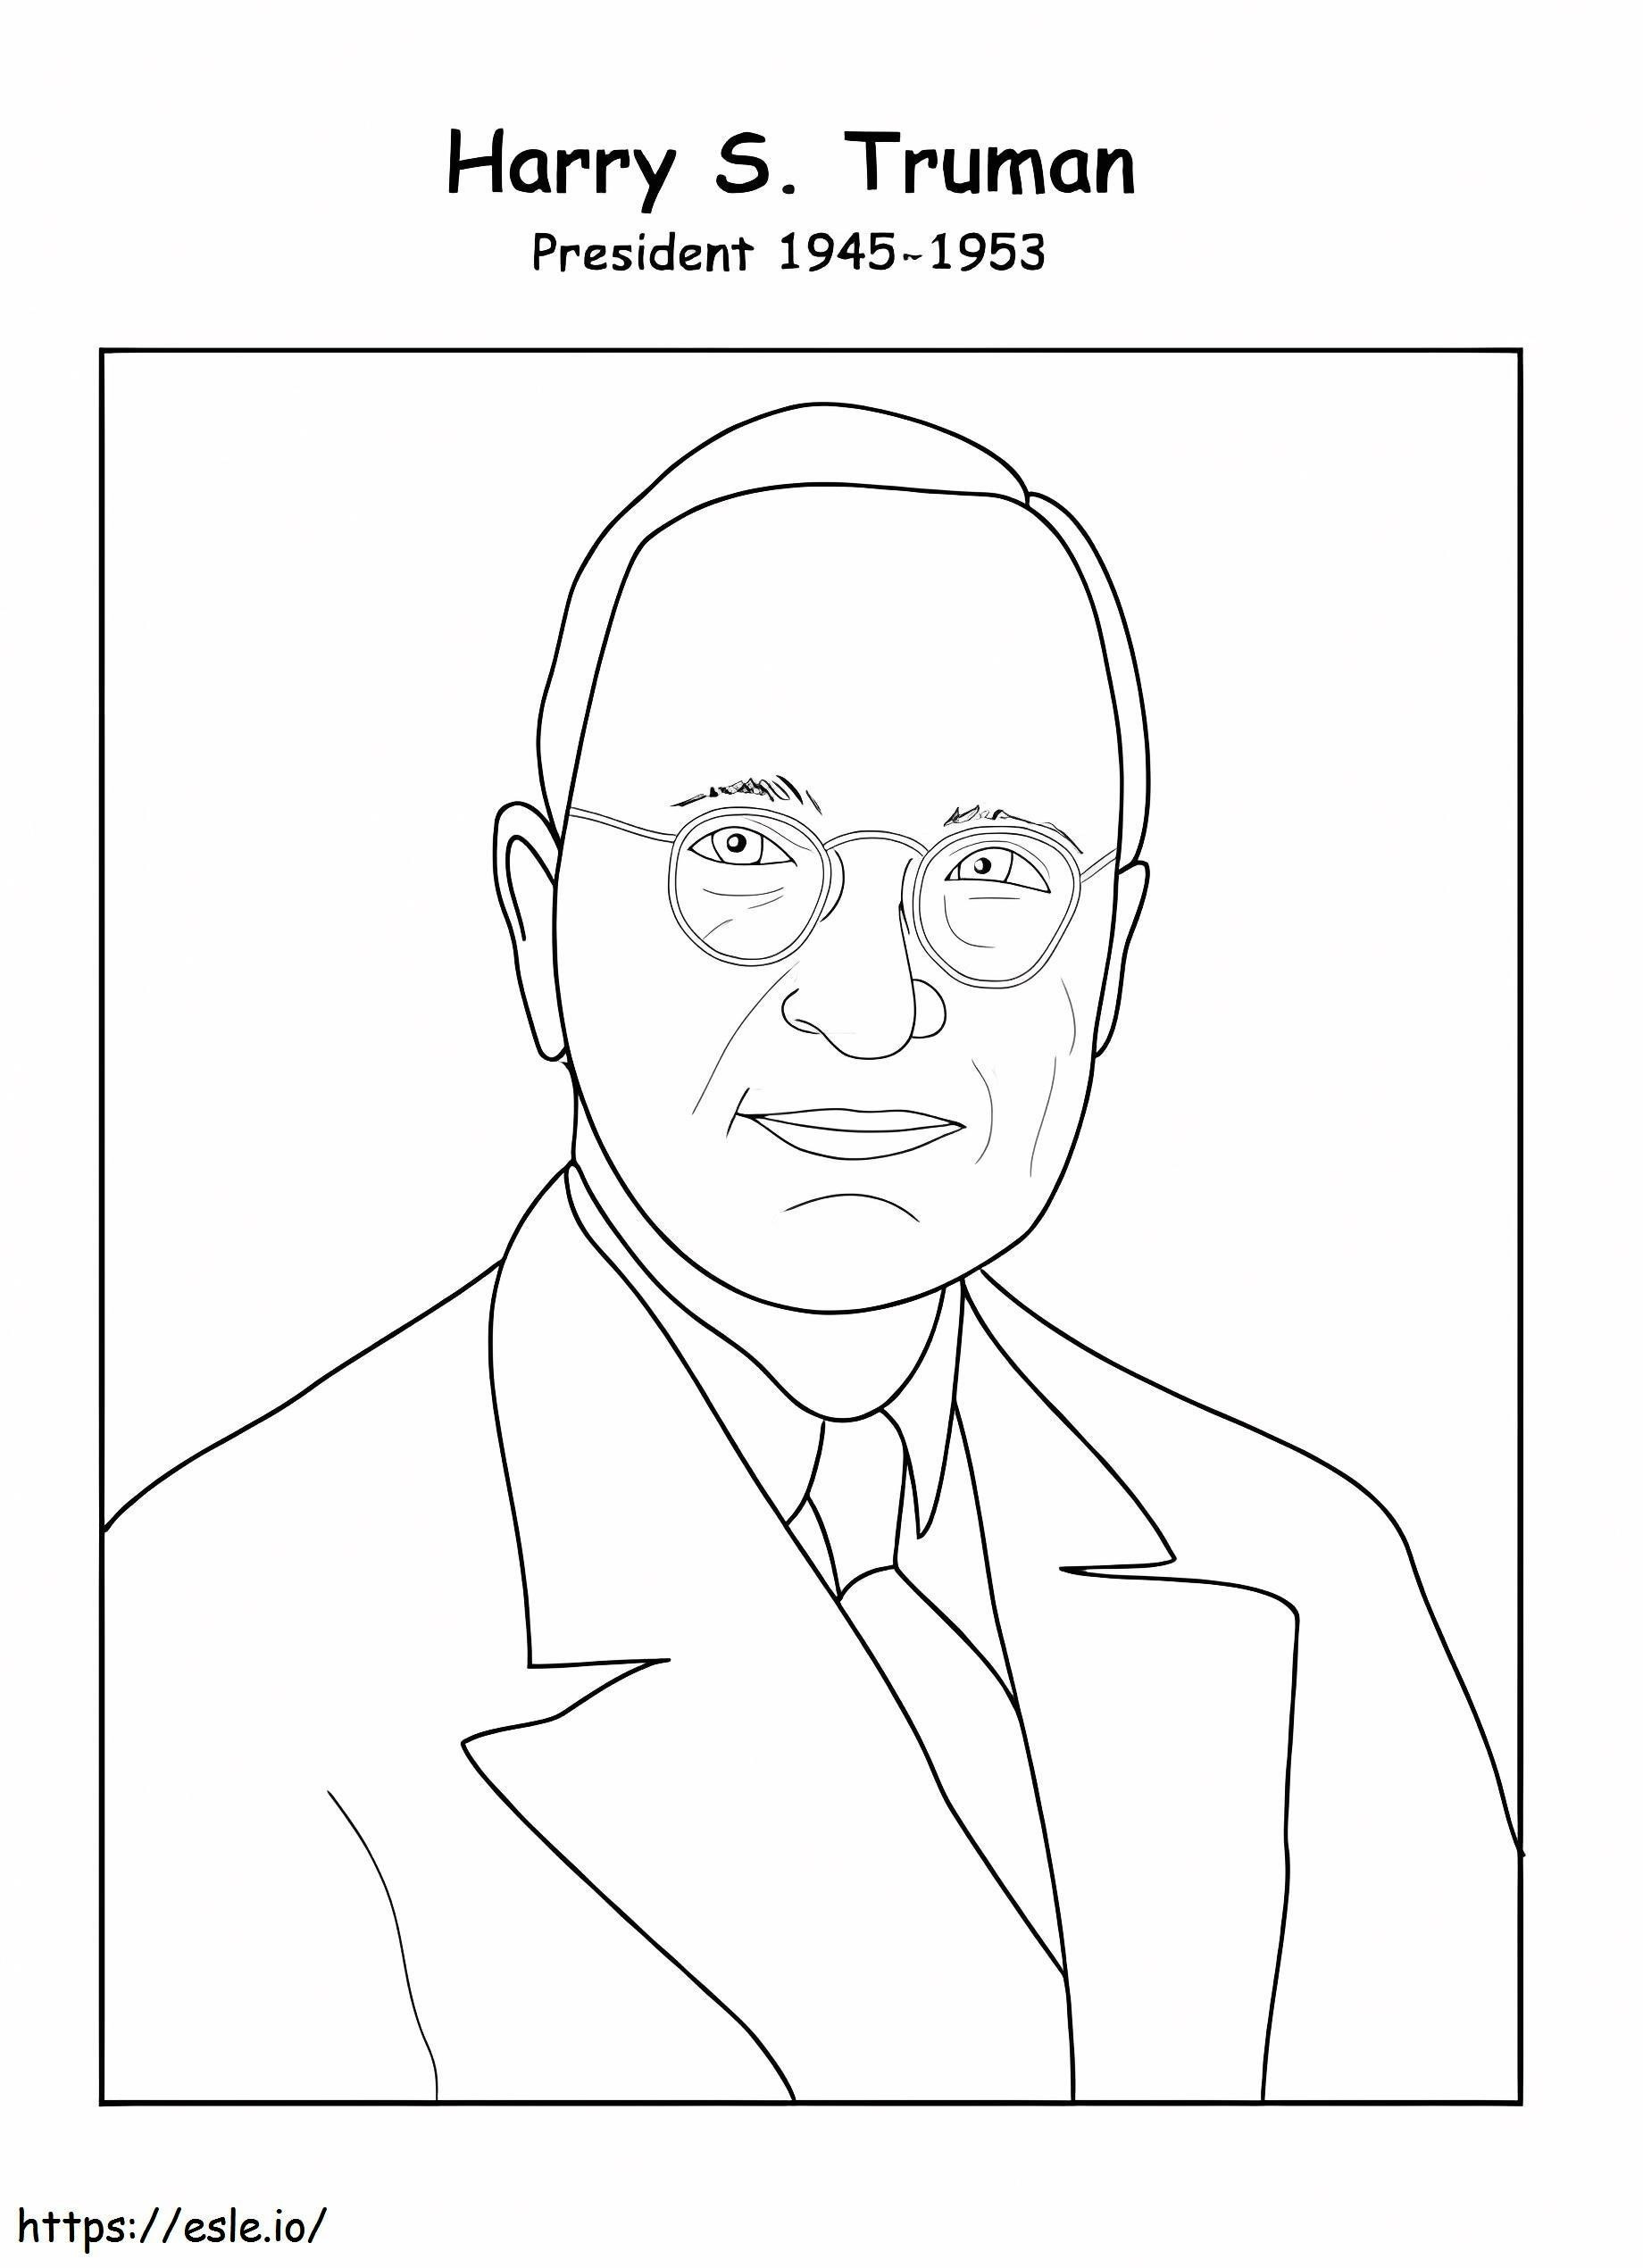 Free Printable Harry S. Truman coloring page